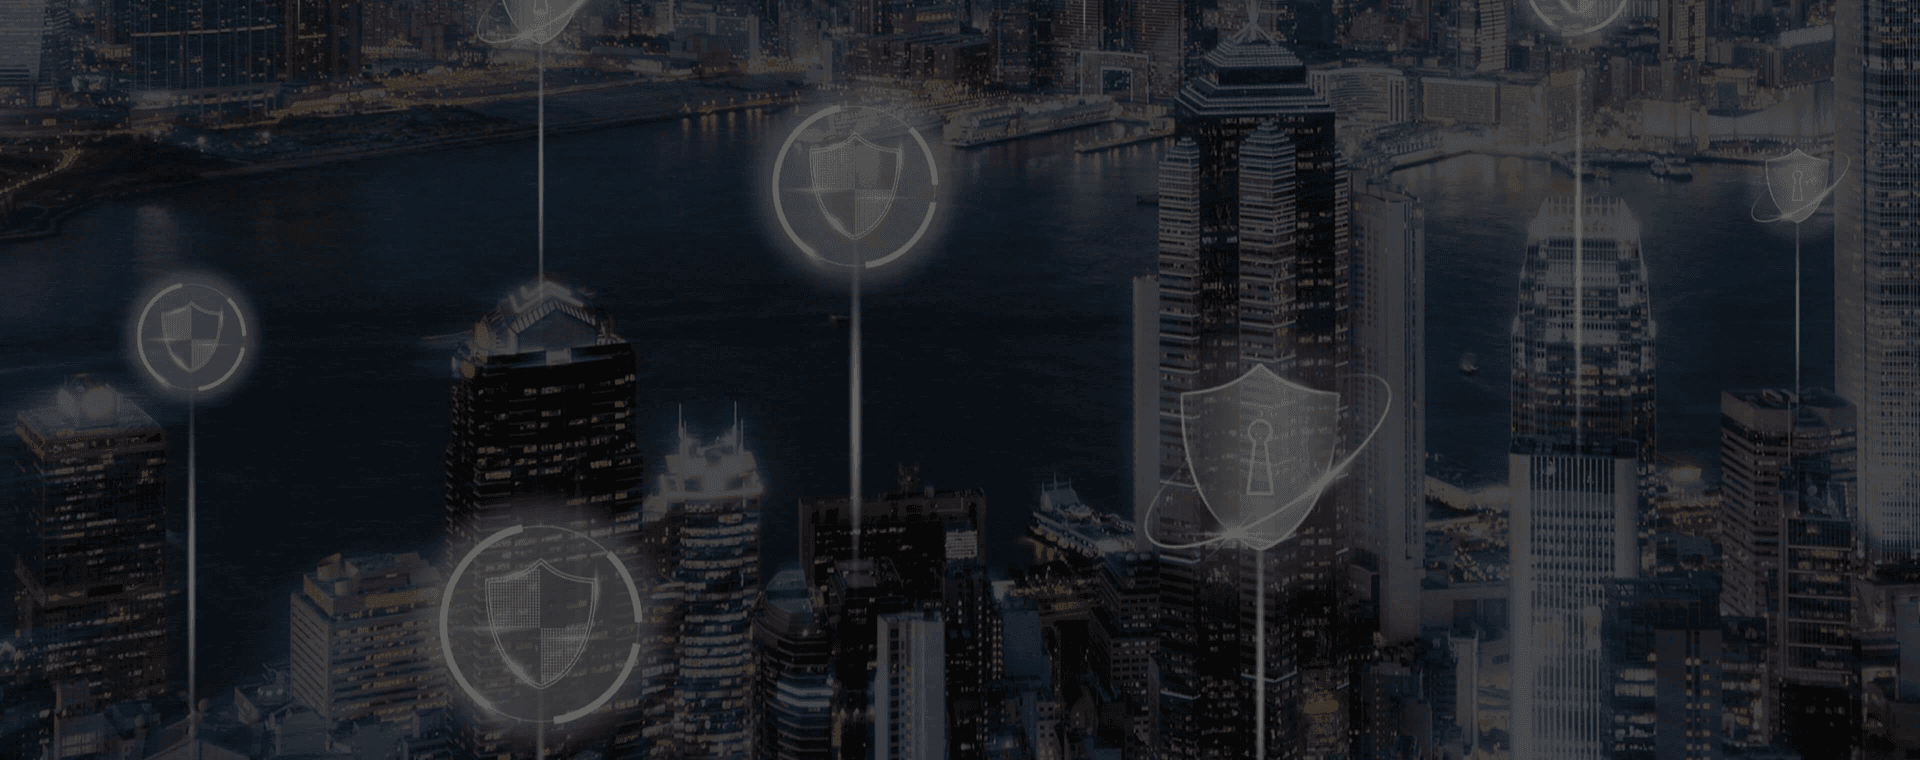 The Benefits and Opportunities of AI Video
Analytics in the MENA Physical Security Market